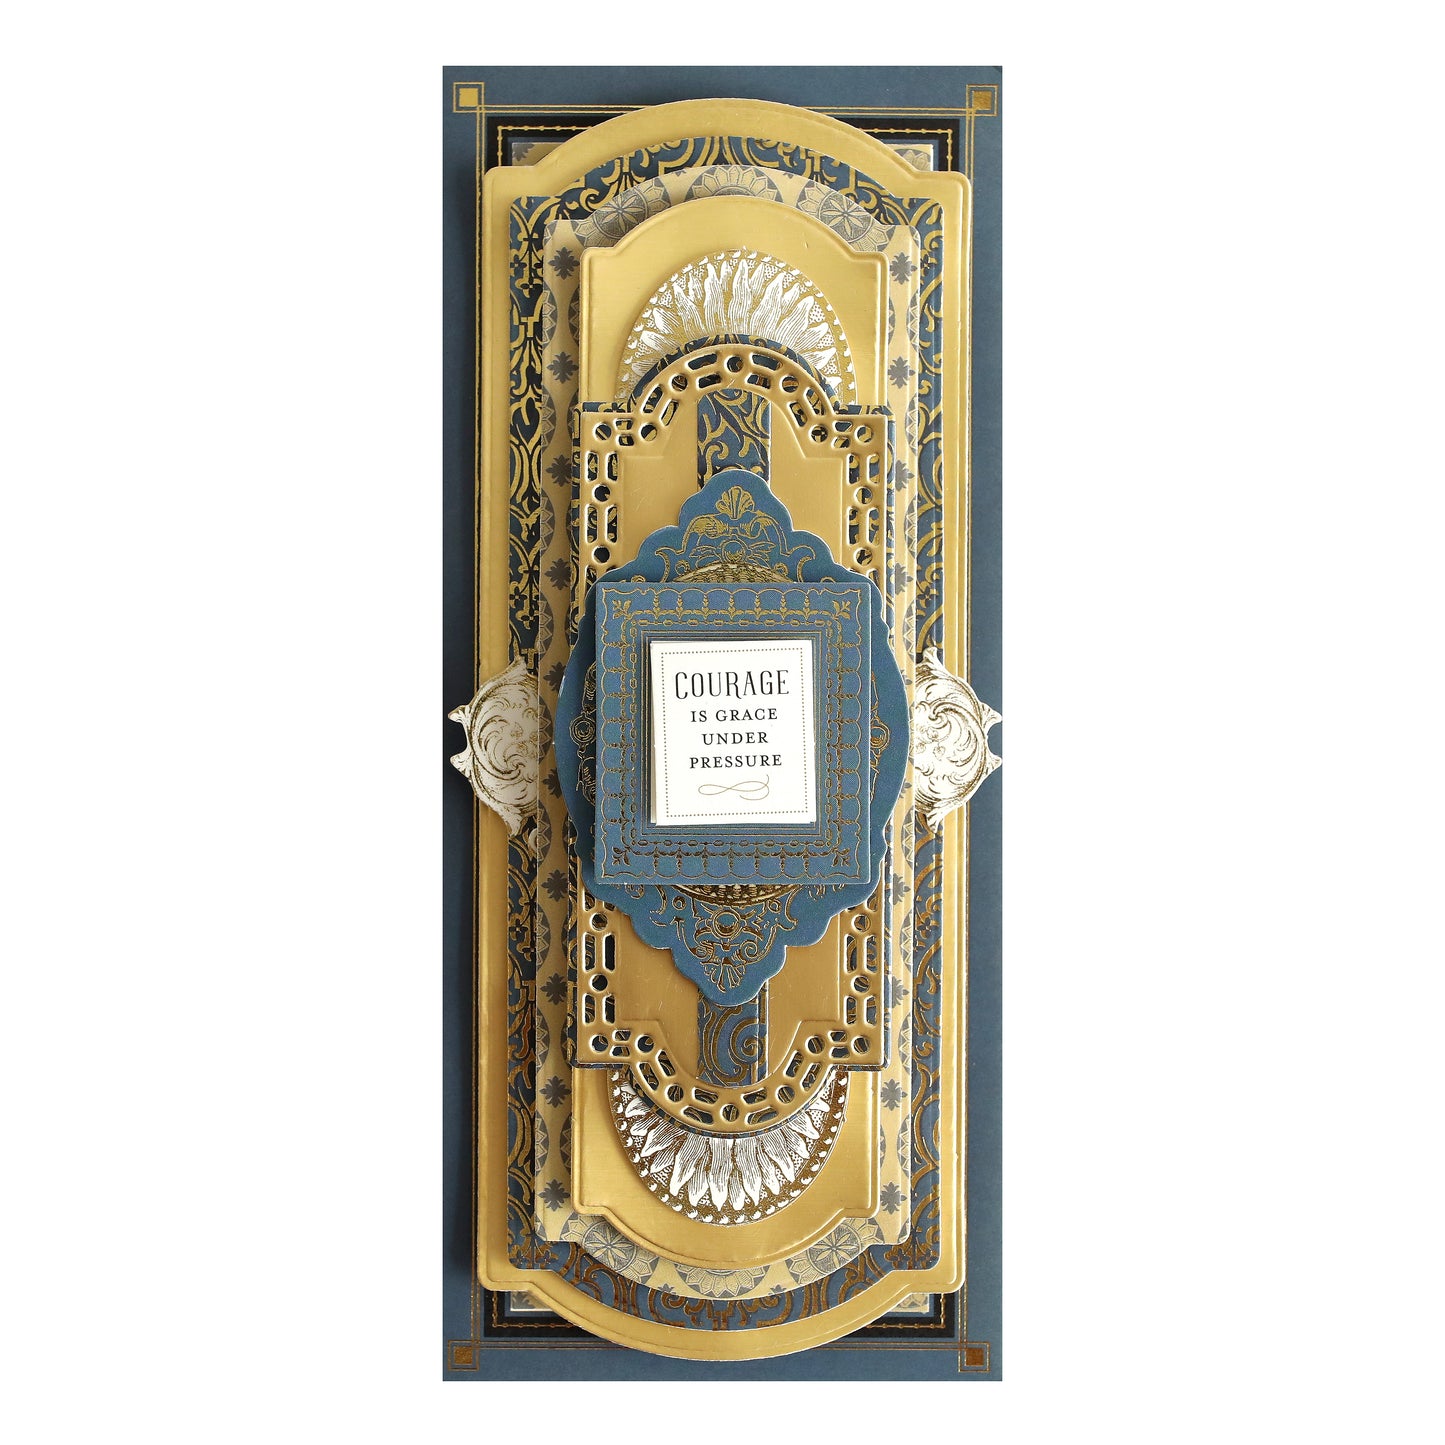 Beaux Regards Slimline Cards and Envelopes are pre-folded blue and gold cards with an ornate design, perfect for cardmaking enthusiasts. They include envelopes.